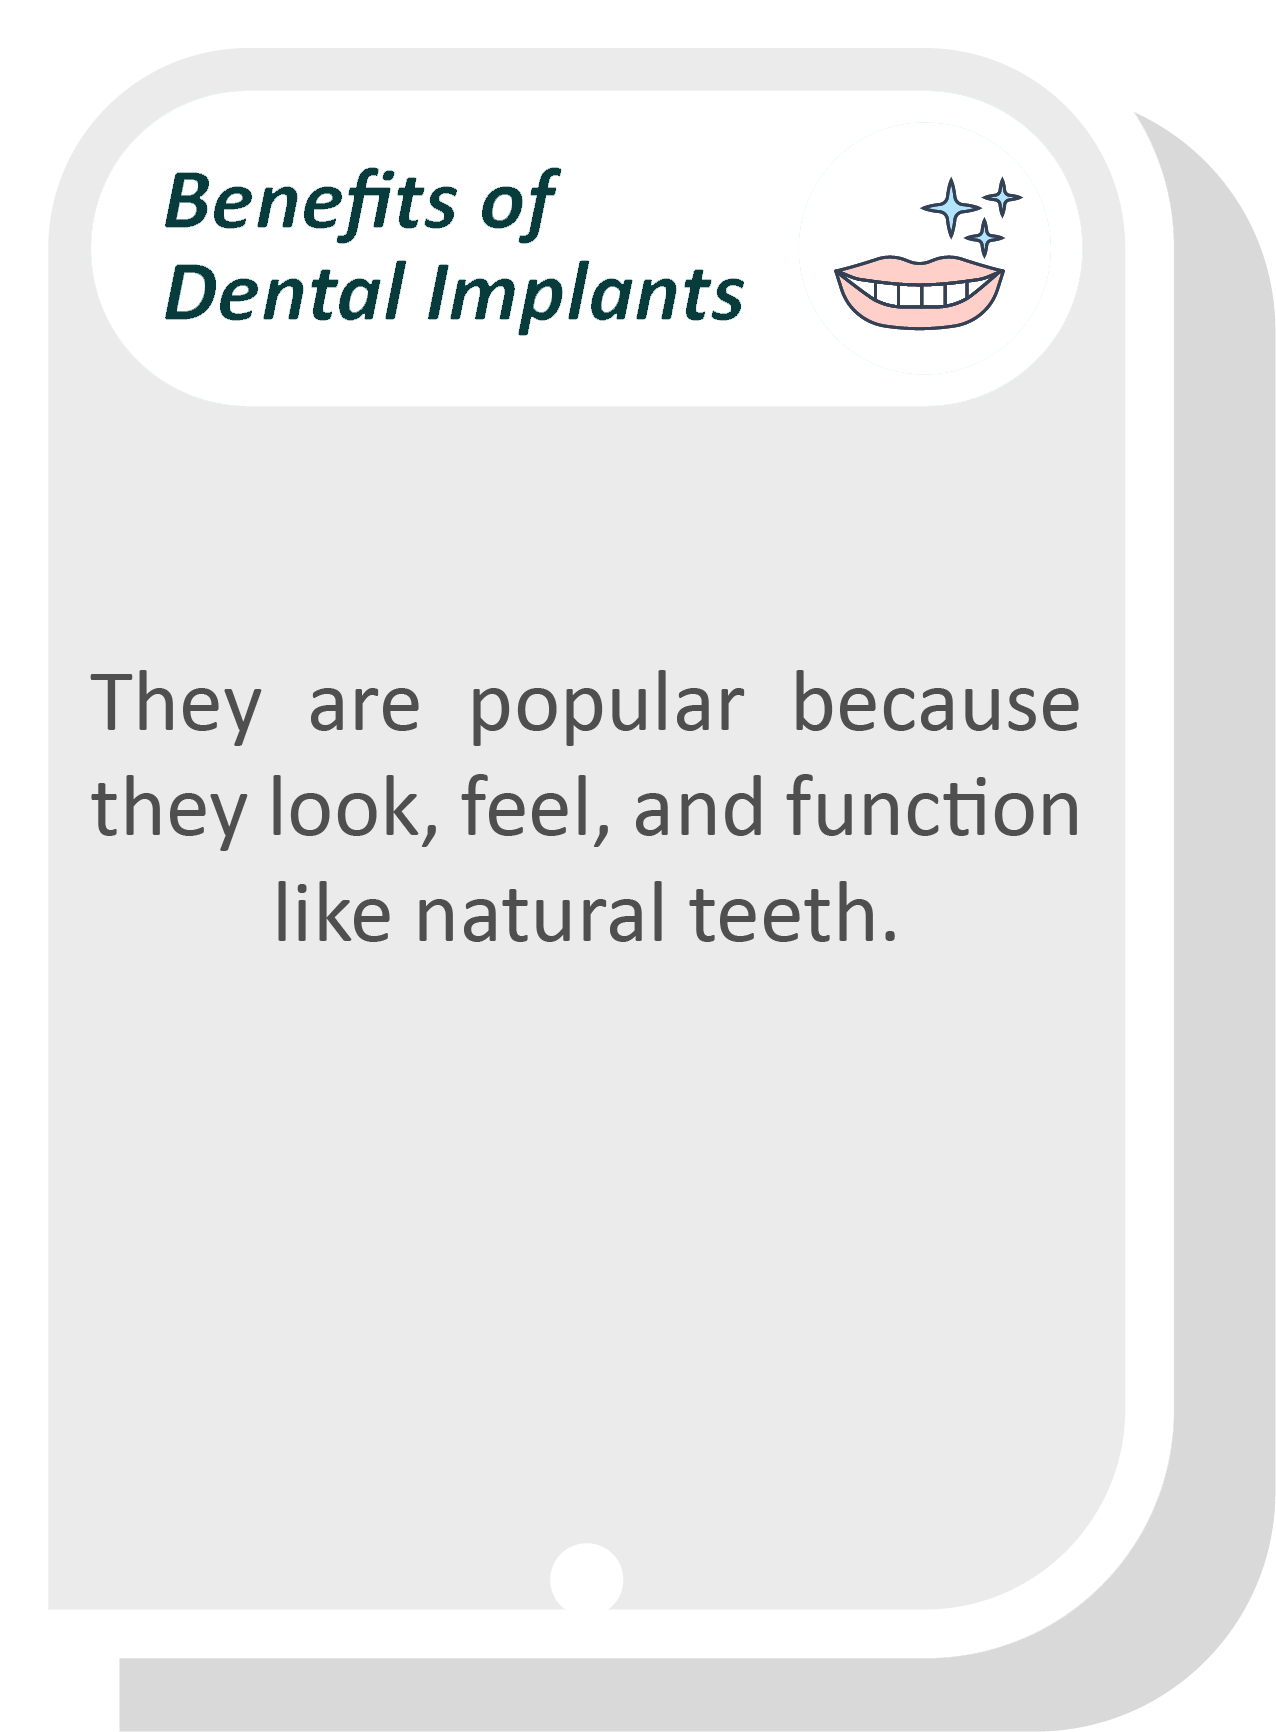 They are popular because they look, feel, and function like natural teeth.